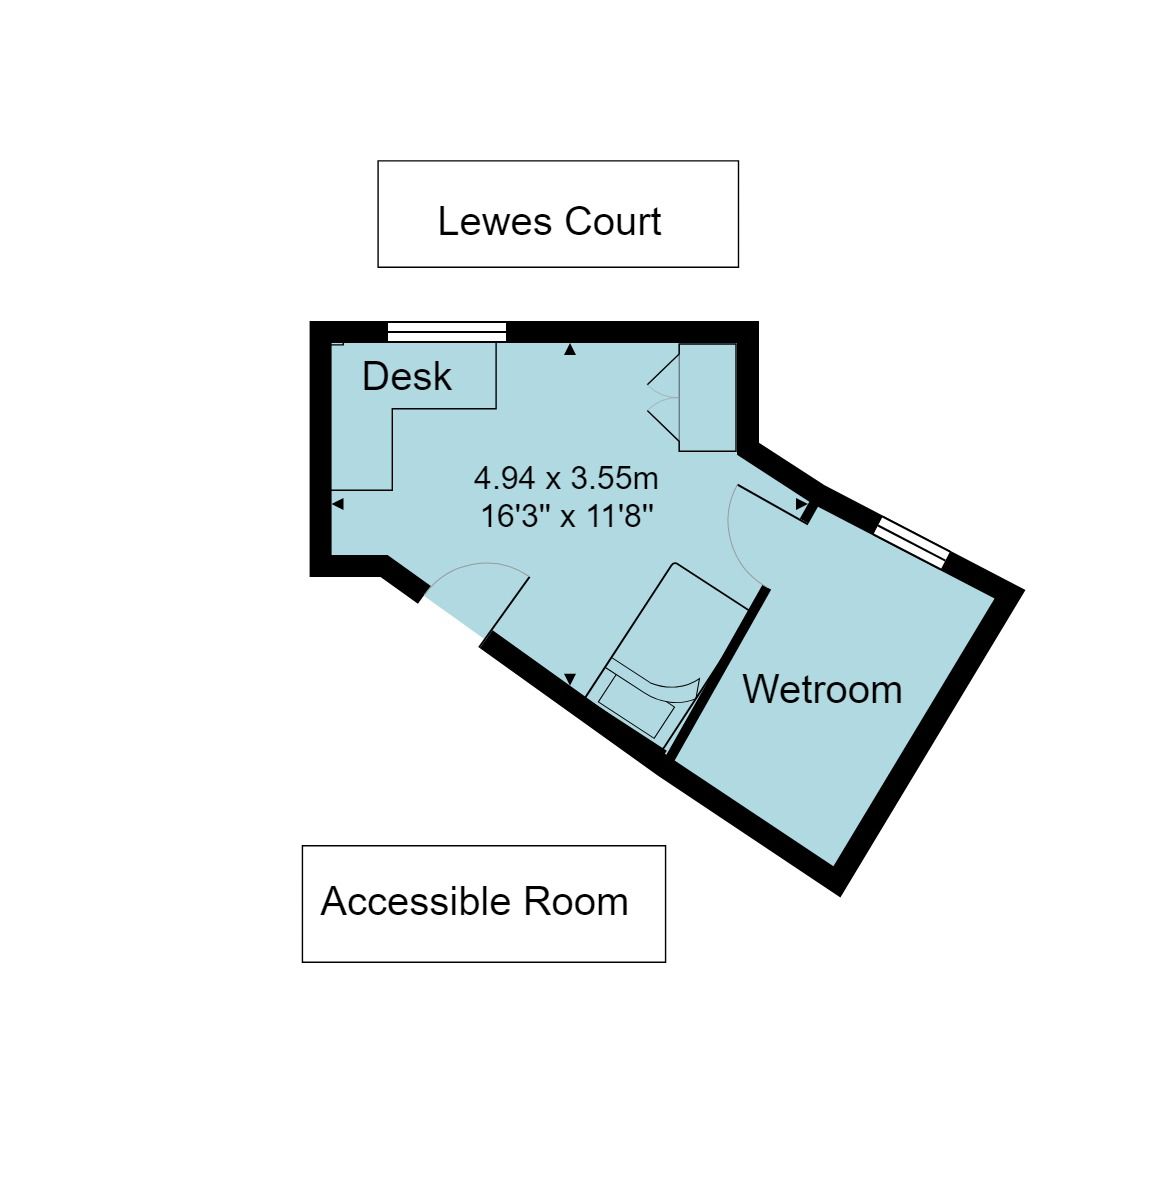 Lewes Court accessible room floorplan, which is 4.94 metres by 3.55 meteres (or 16 foot 3 inches by 11 foot 8 inches)